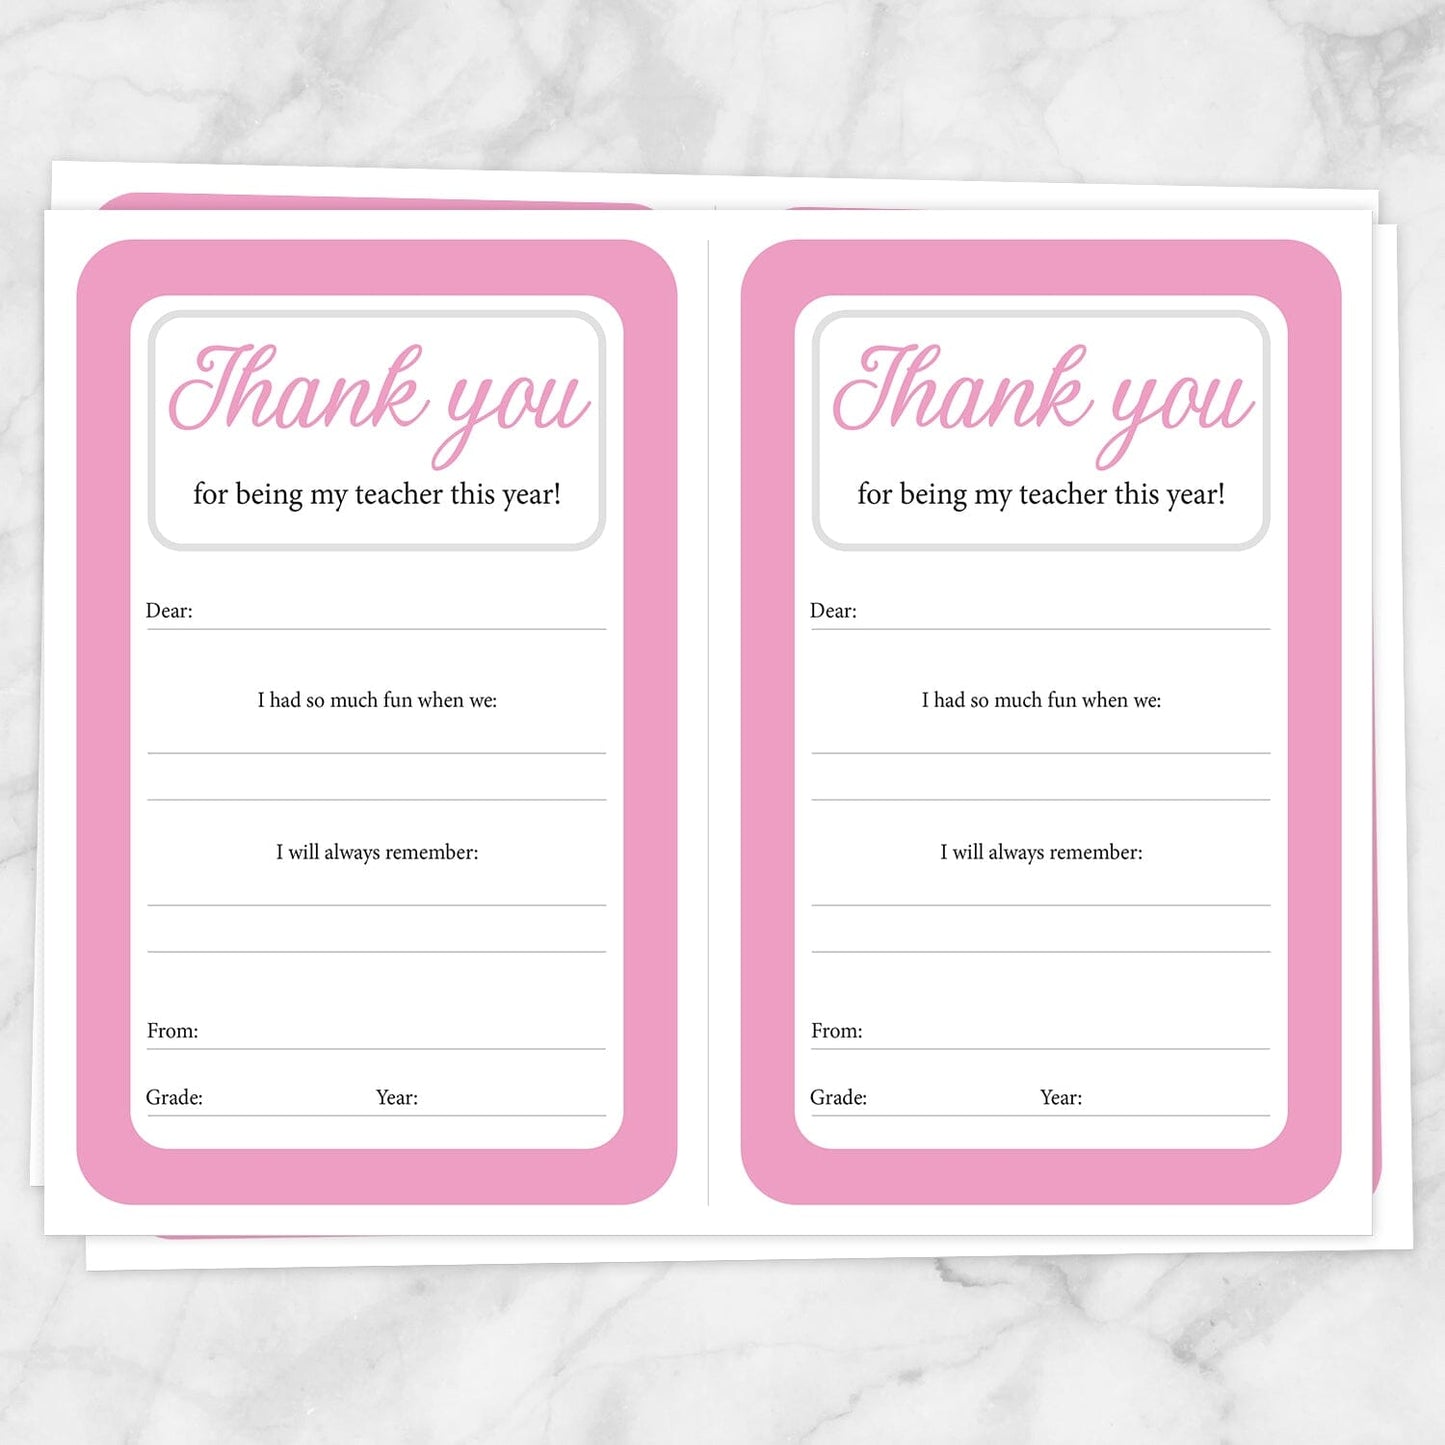 Printable Teacher Thank You Notes in pink at Printable Planning. Sheets of 2 thank you notes per page.